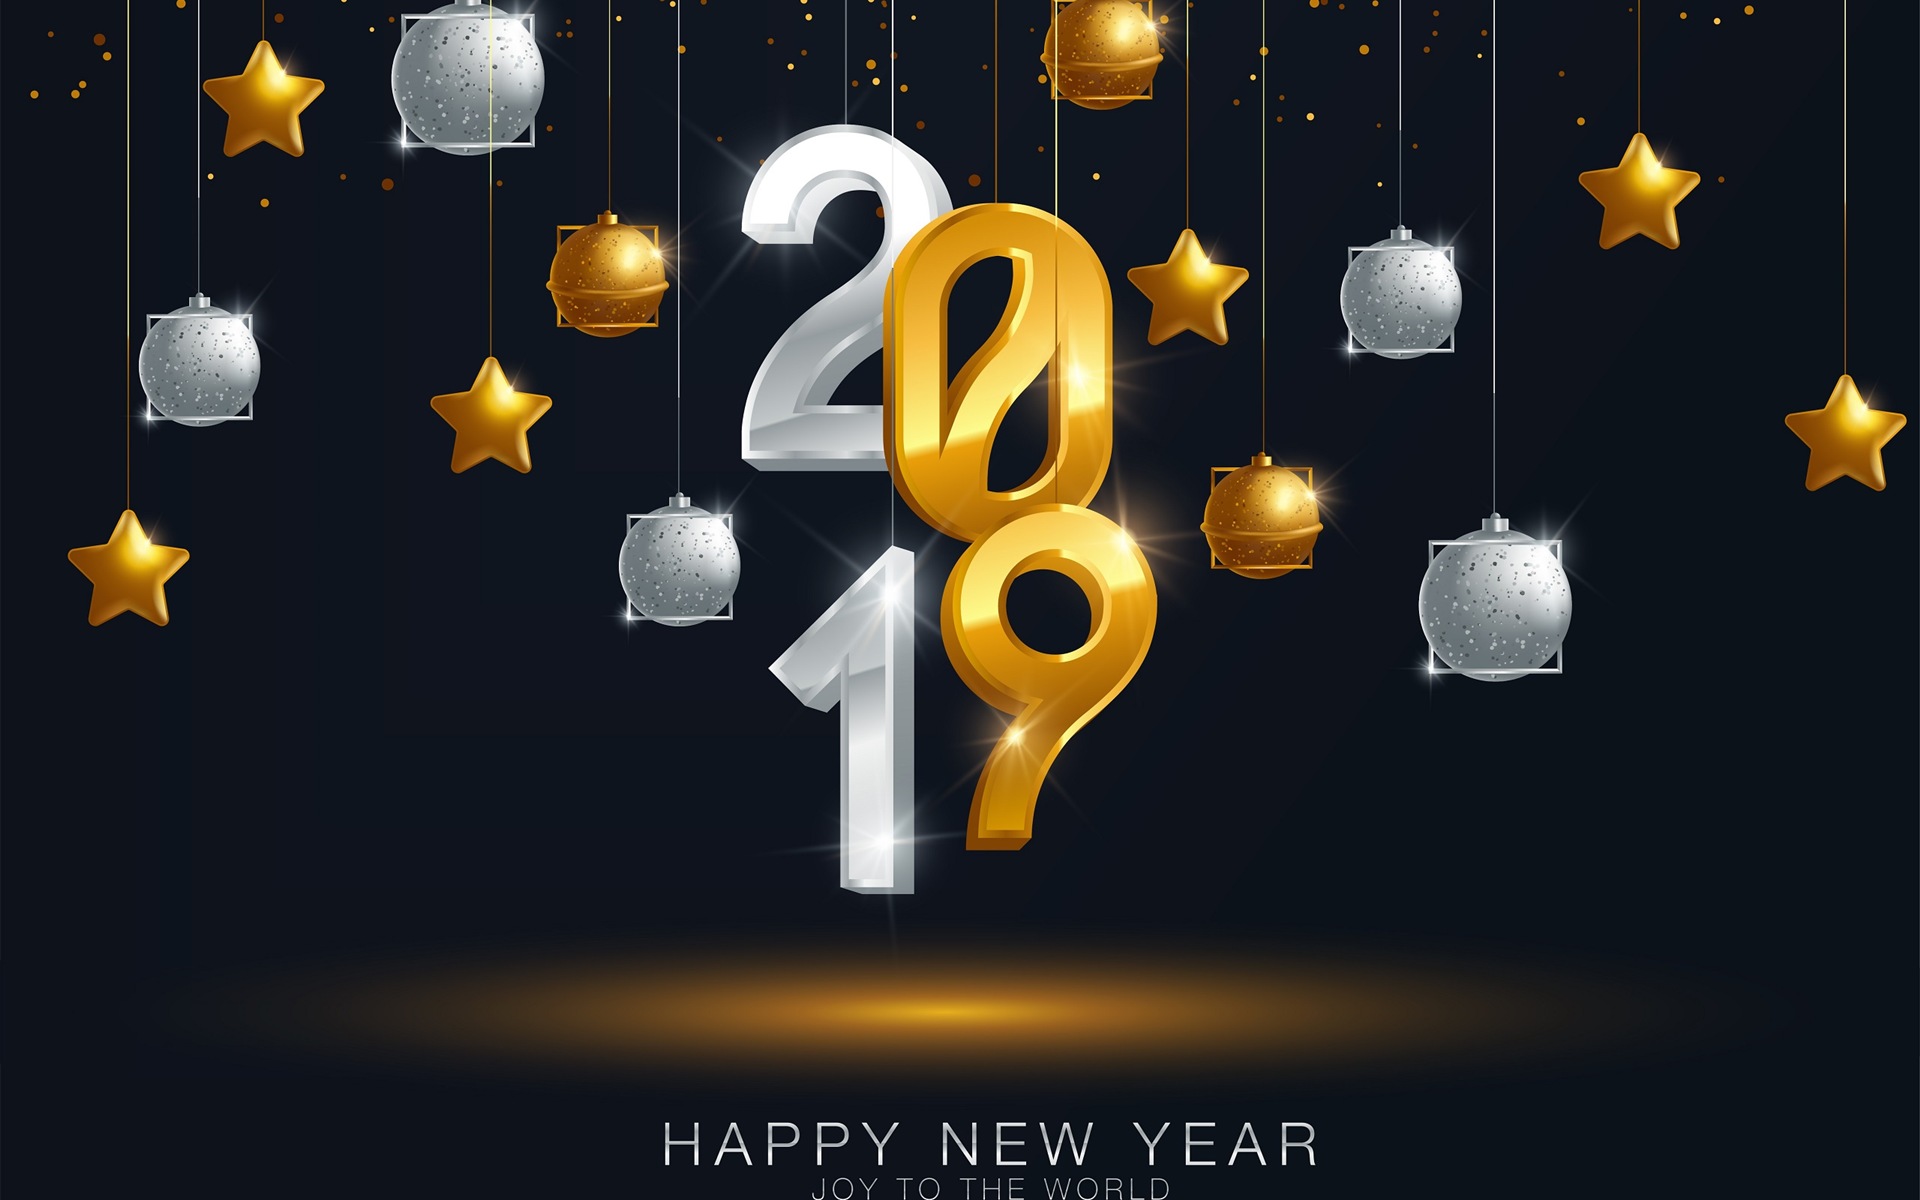 Happy New Year 2019 HD wallpapers #12 - 1920x1200